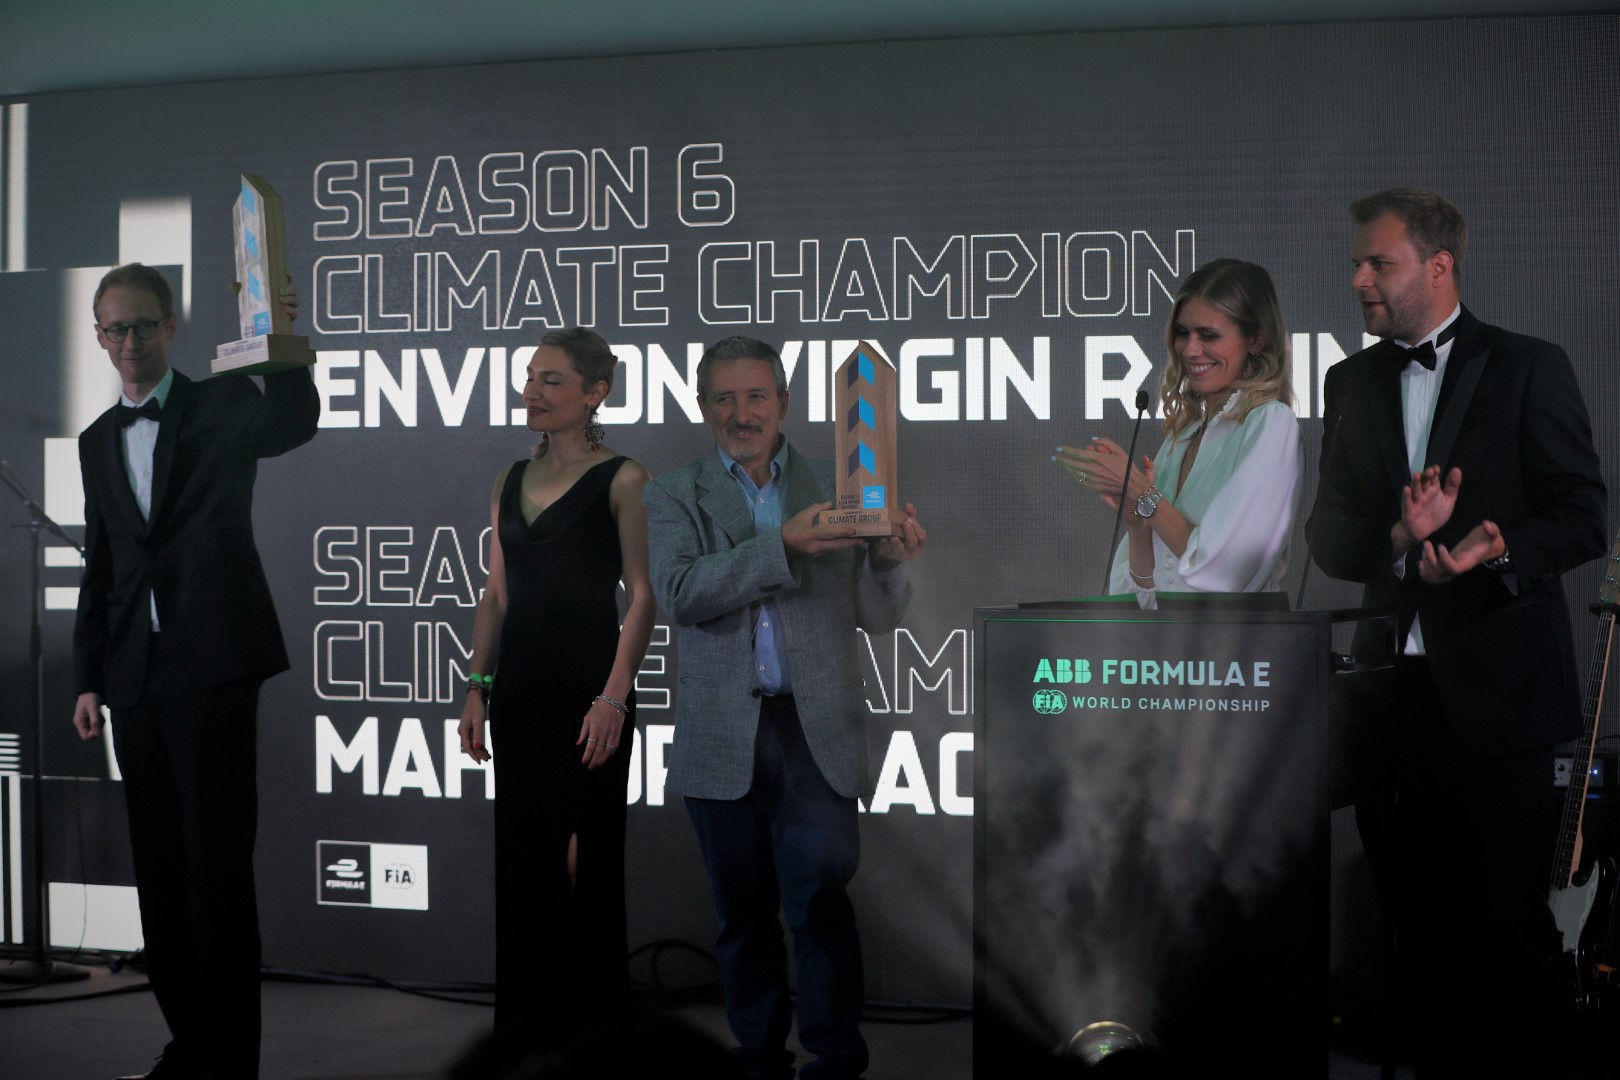 BERLIN TEMPELHOF AIRPORT, GERMANY - AUGUST 15: Sylvain Filippi, Managing Director, Envision Virgin Racing, and guests on stage with TV Presenter Nicki Shields and TV Commentator Jack Nicholls at the 2020/21 Season 7 Awards Gala during the Berlin E-Prix II at Berlin Tempelhof Airport on Sunday August 15, 2021 in Berlin, Germany. (Photo by Carl Bingham / LAT Images)